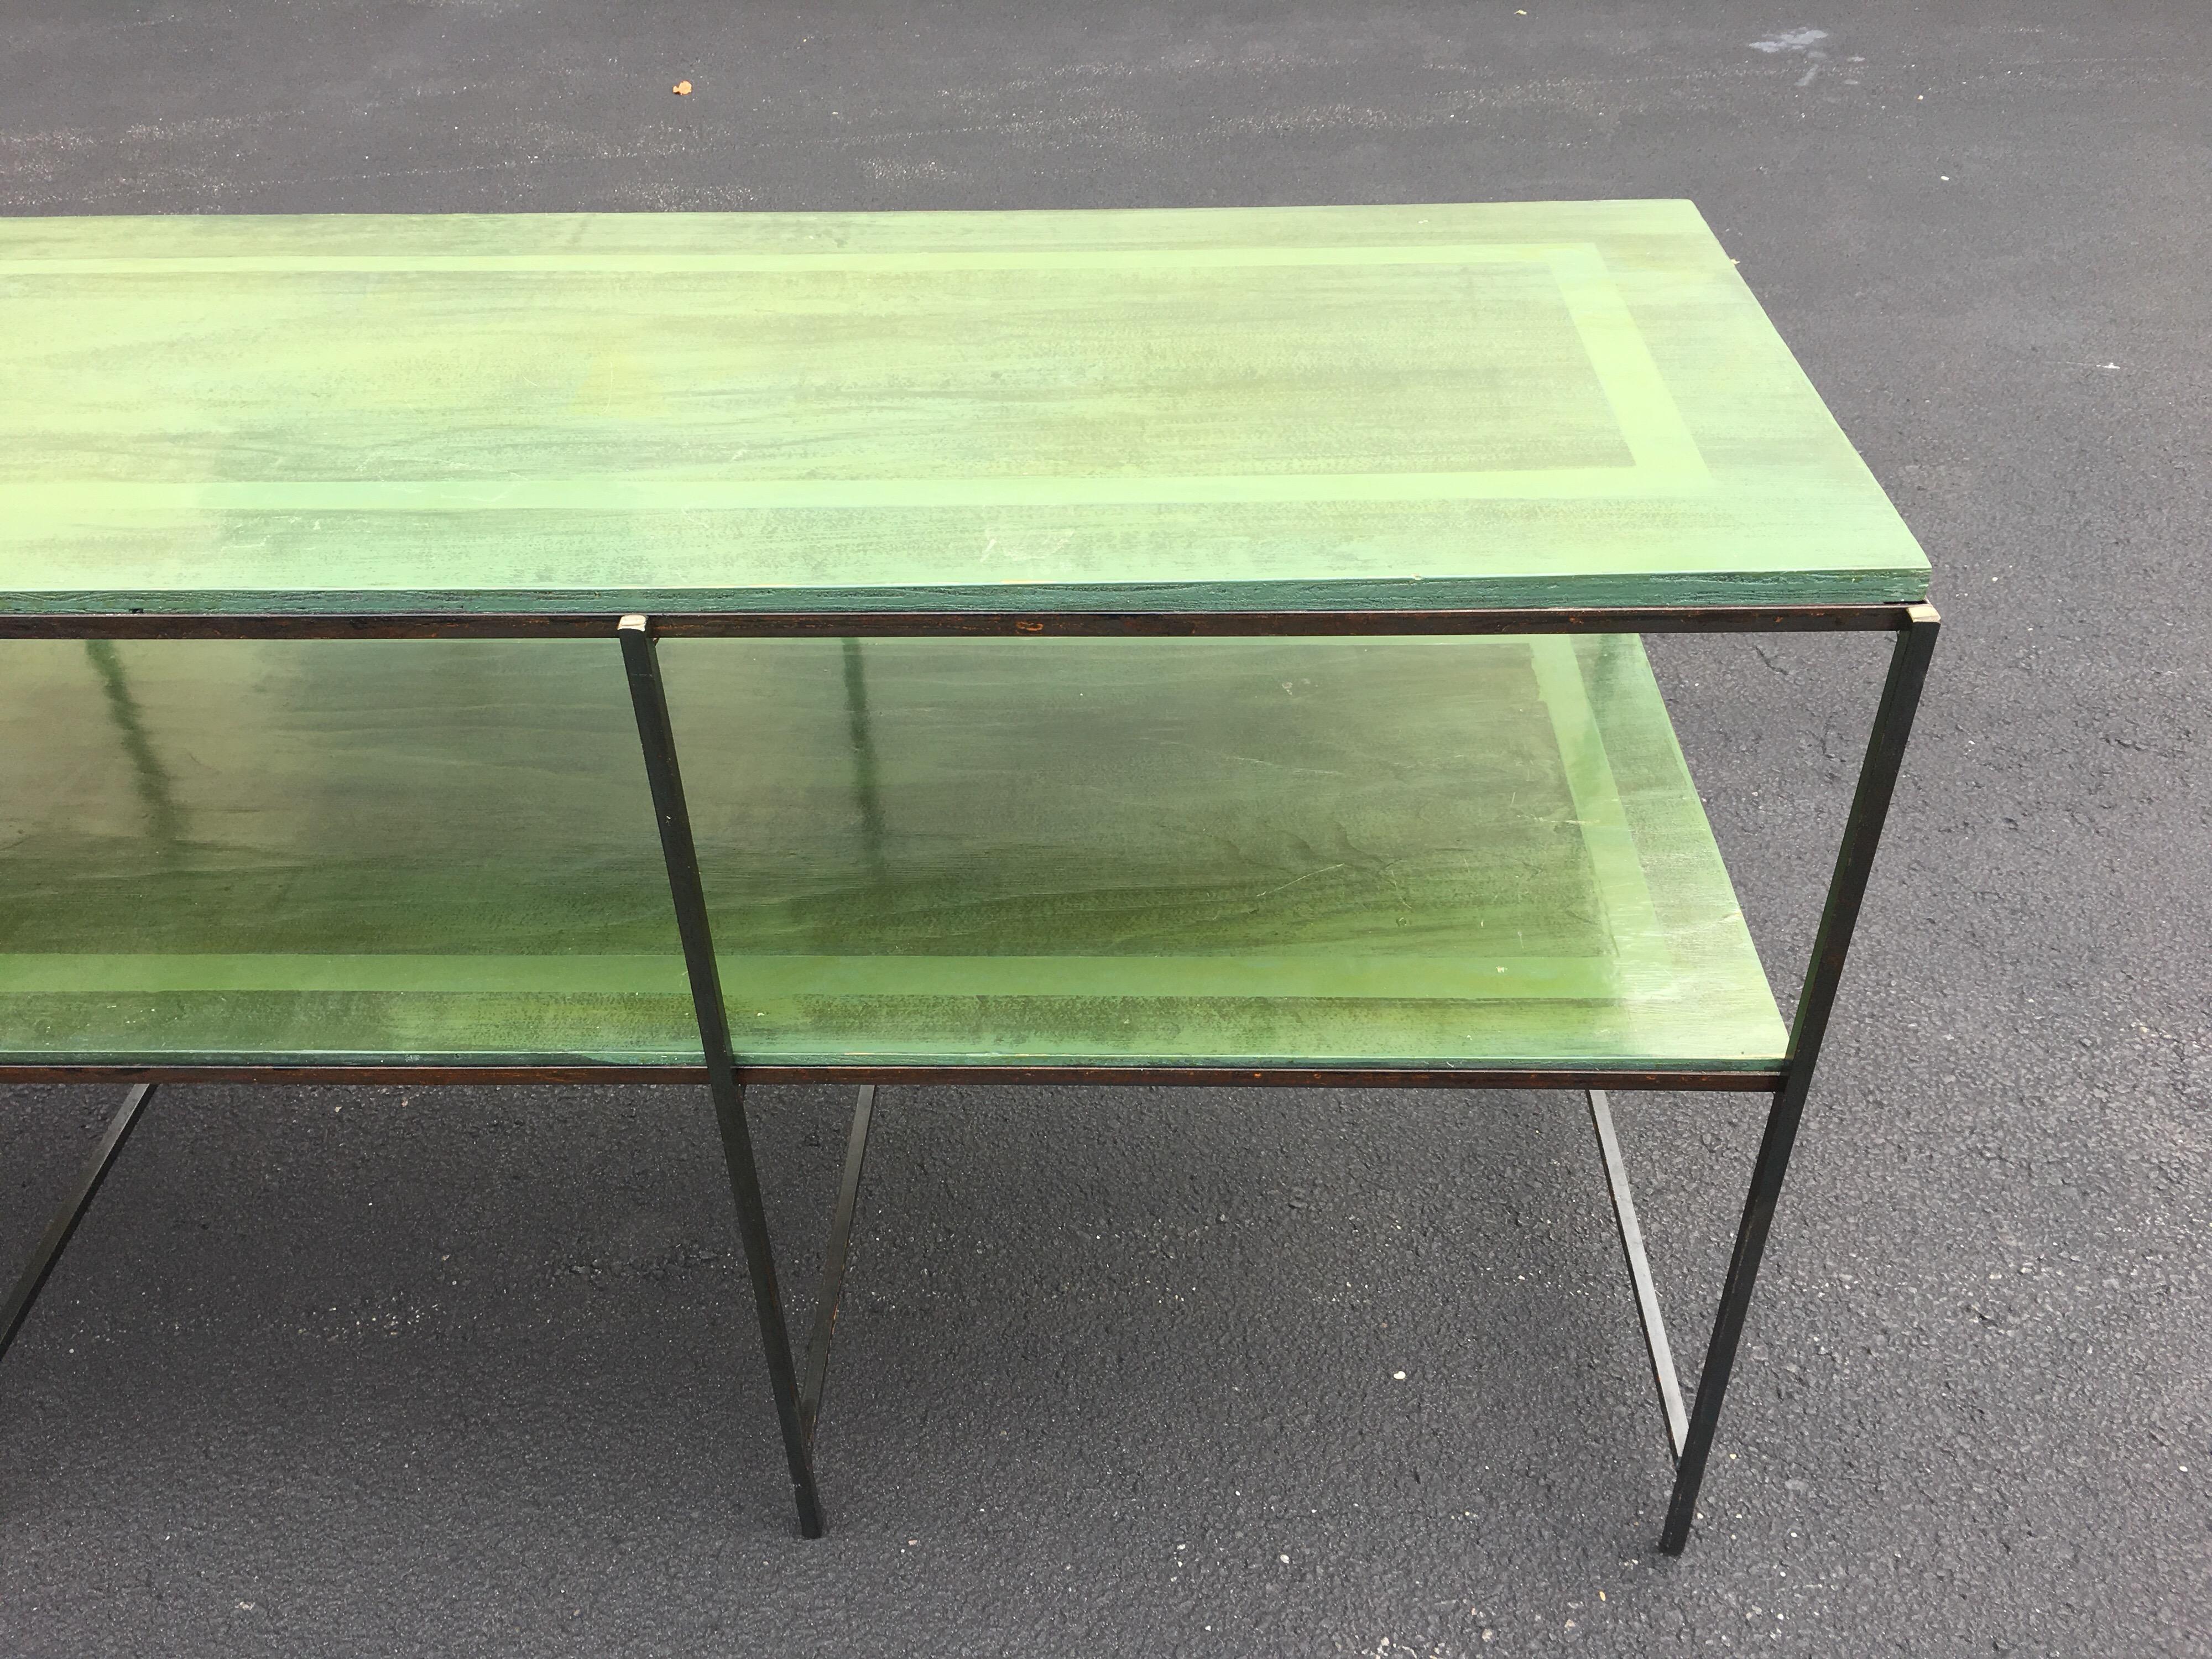 This simple Classic iron tiered table has a great look. It was custom-made with a brushed custom green finish and an inset border stripe. A very sharp high gloss finish.